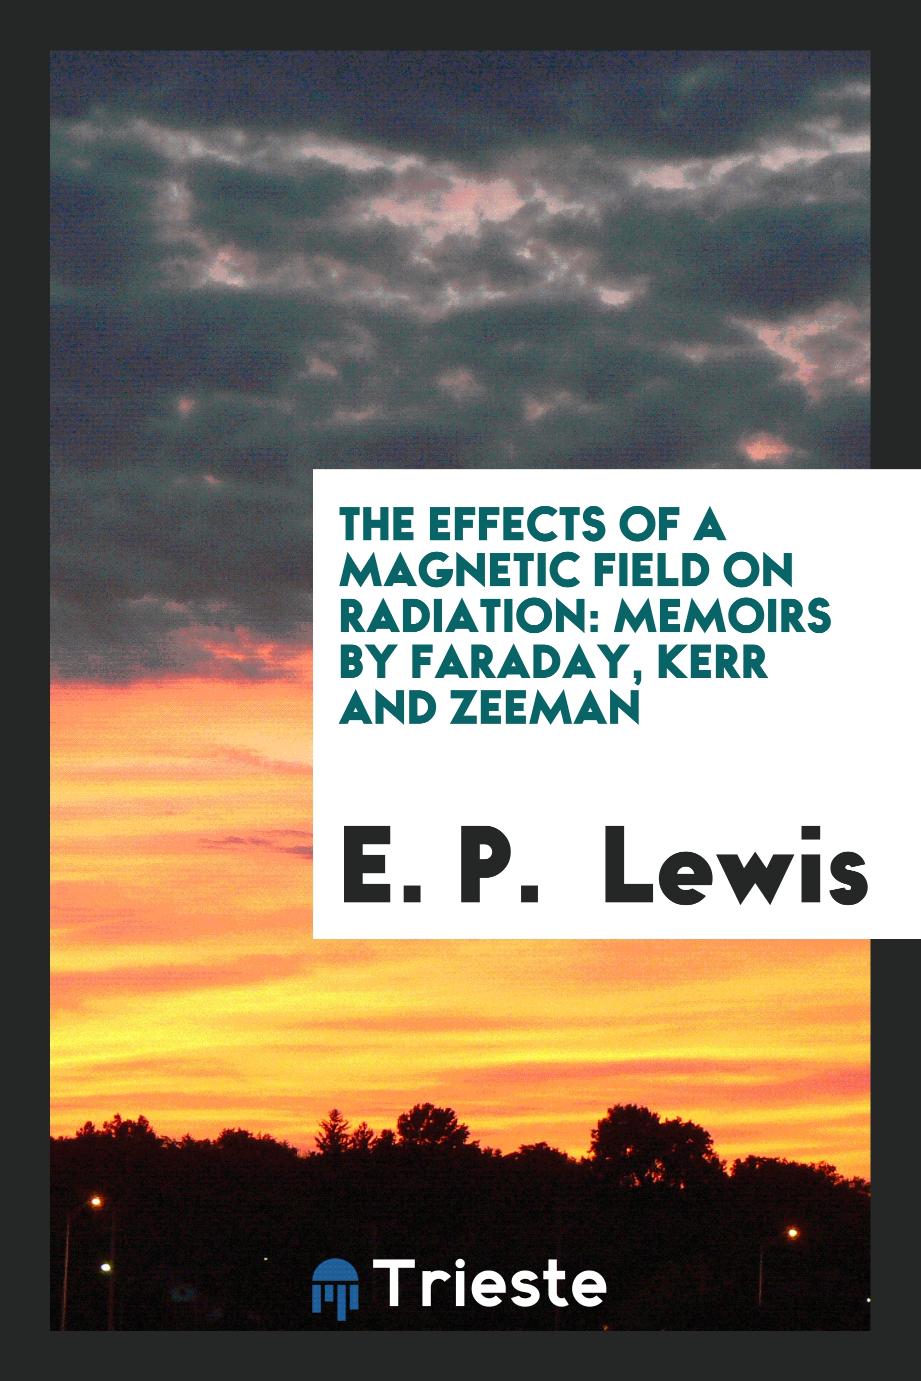 The Effects of a Magnetic Field on Radiation: Memoirs by Faraday, Kerr and Zeeman